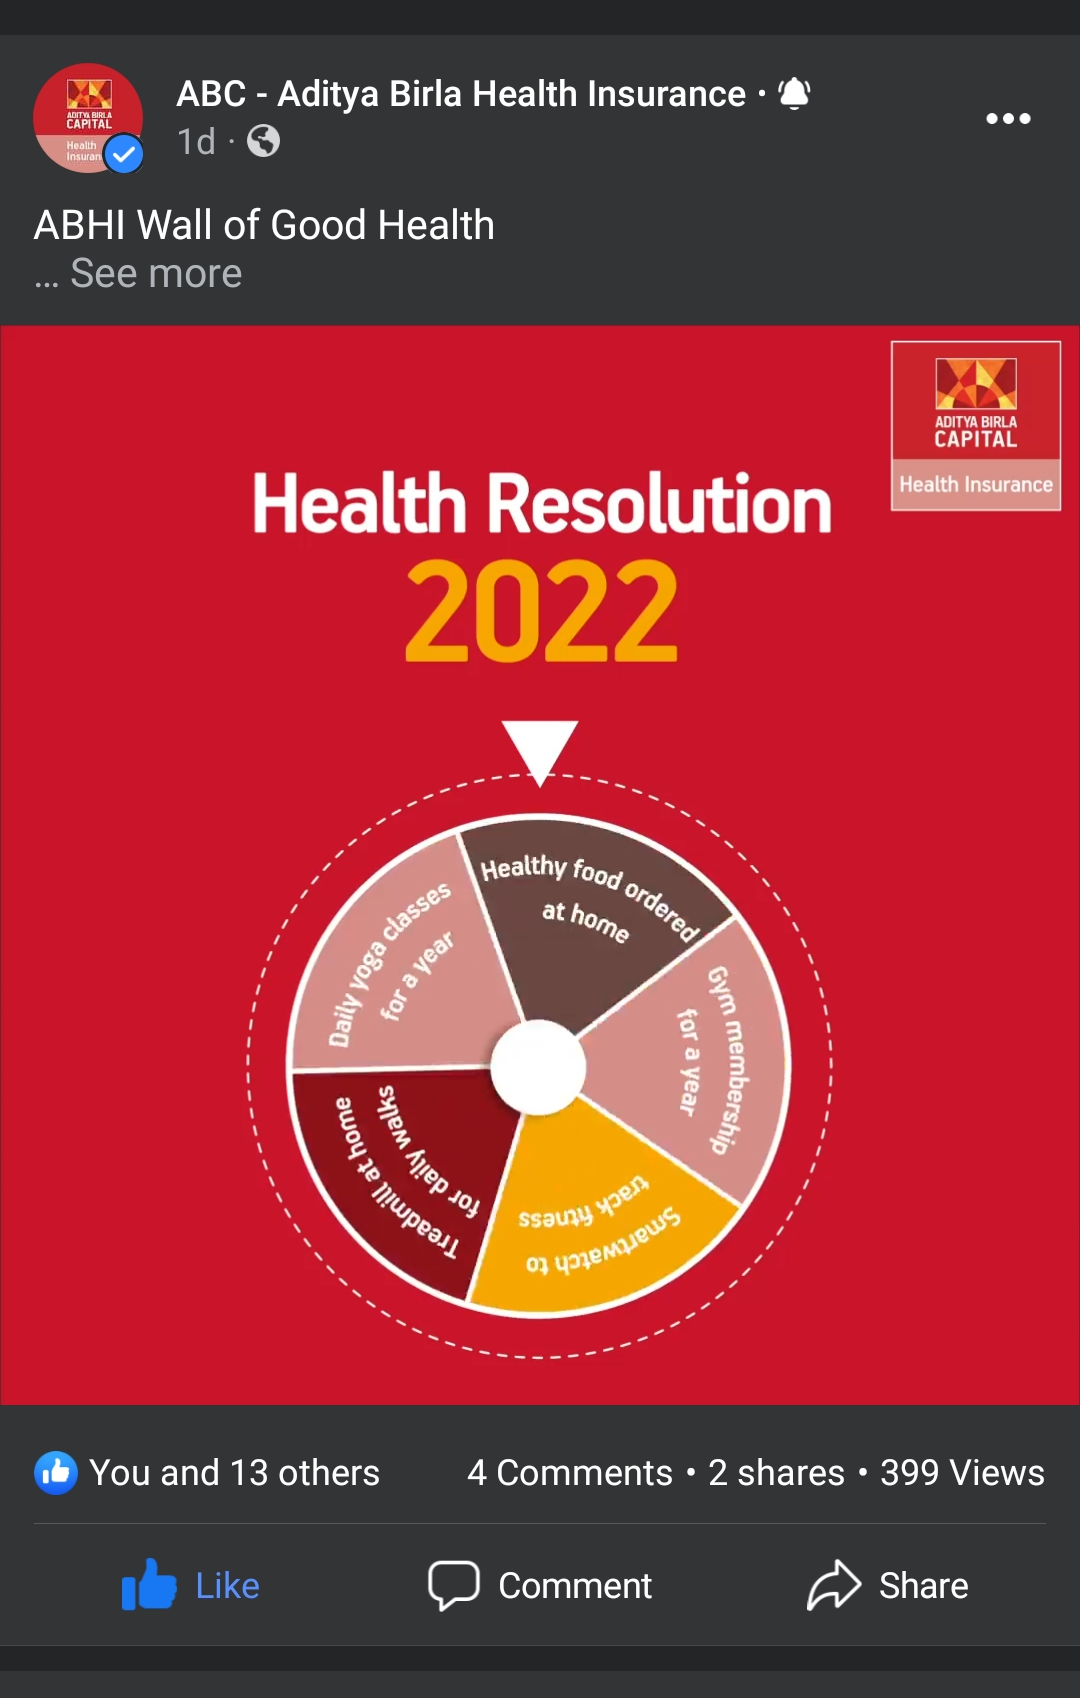 Health Resolution Images